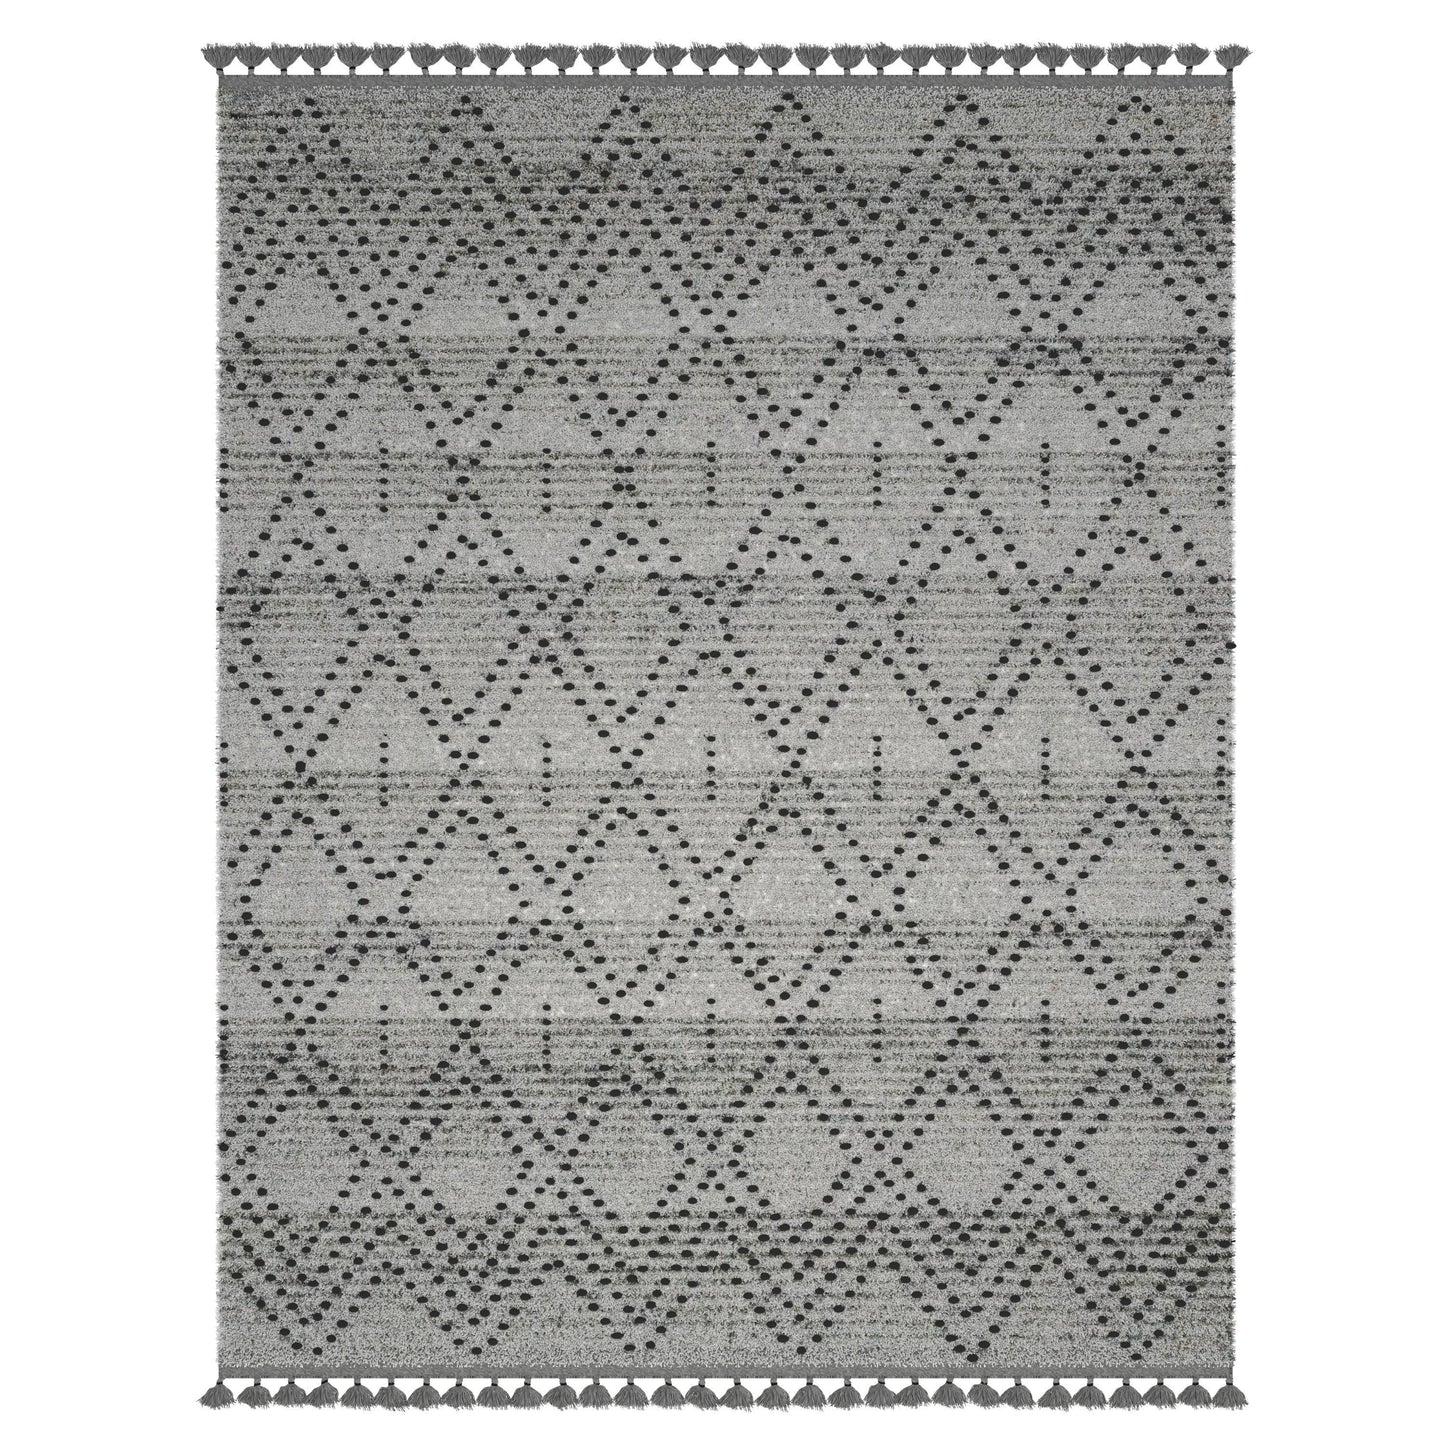 Vail Dowlan Gray and Charcoal Area Rug with Tassels 5x8